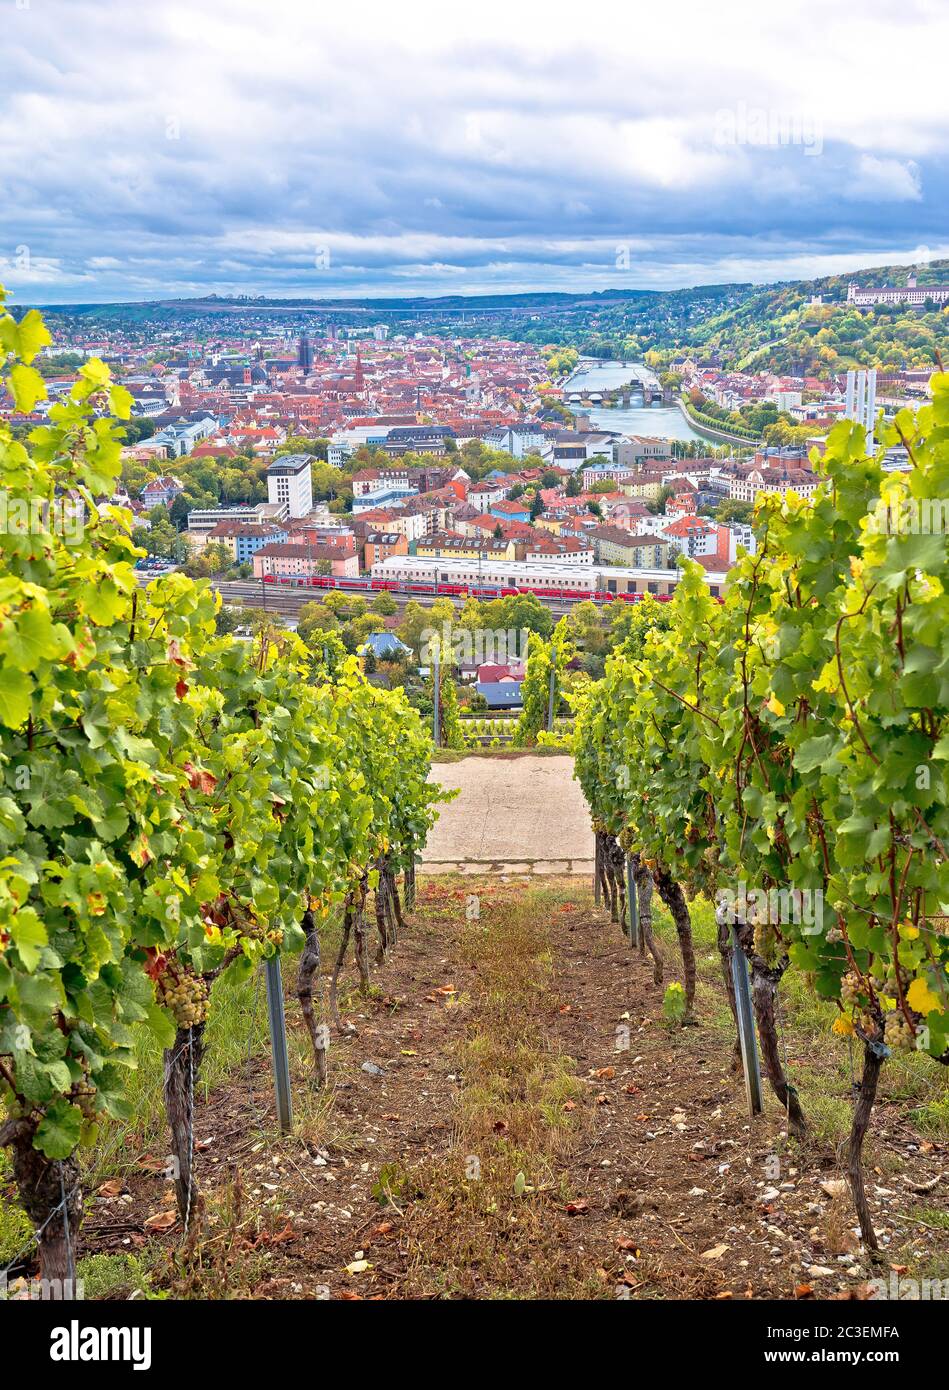 Old town of Wurzburg view from the vineyard hill Stock Photo